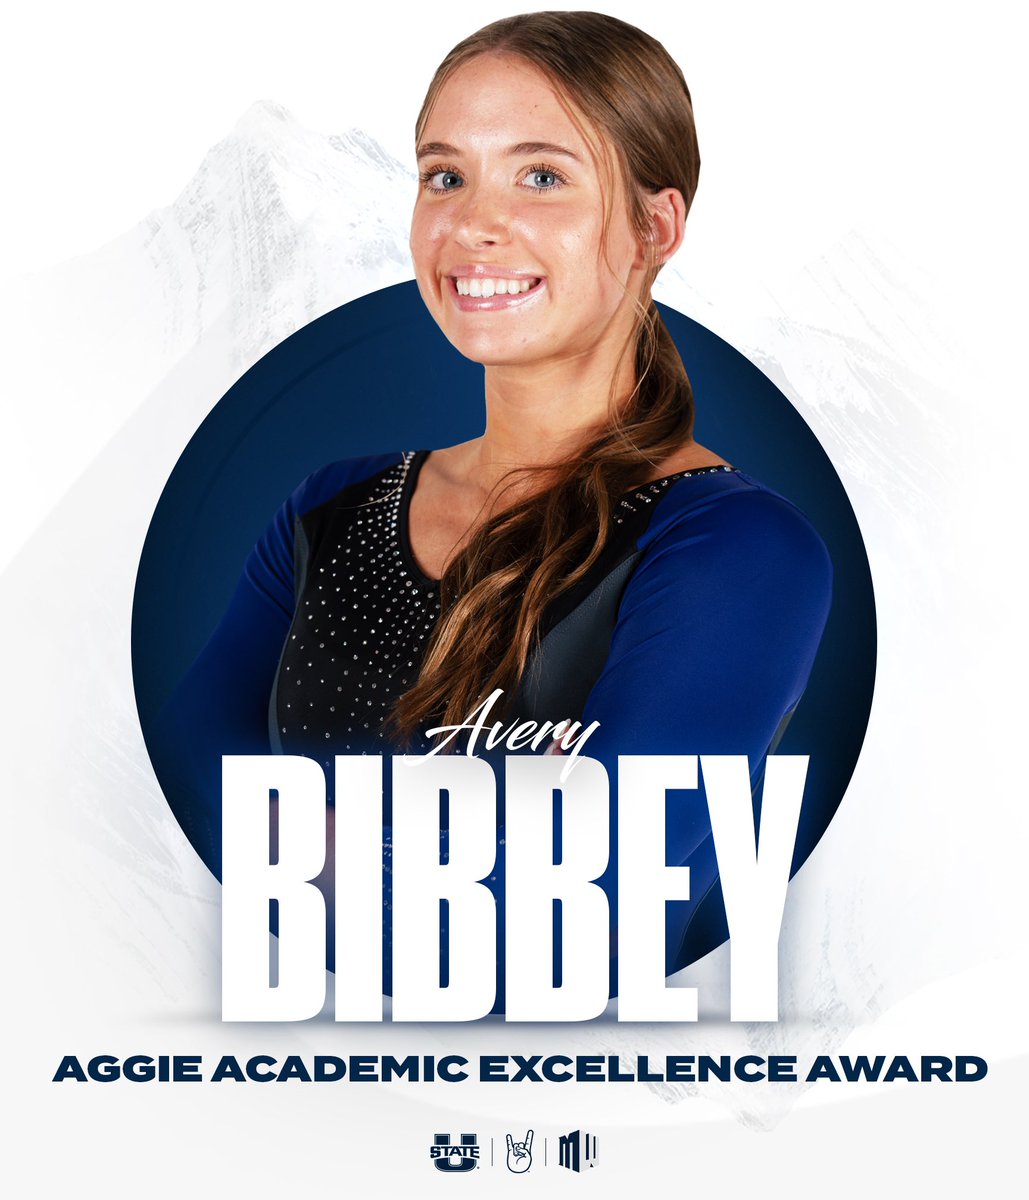 With a 4.0 cumulative GPA, our 2024 Aggie Academic Excellence Award winner is Avery Bibbey! 📚